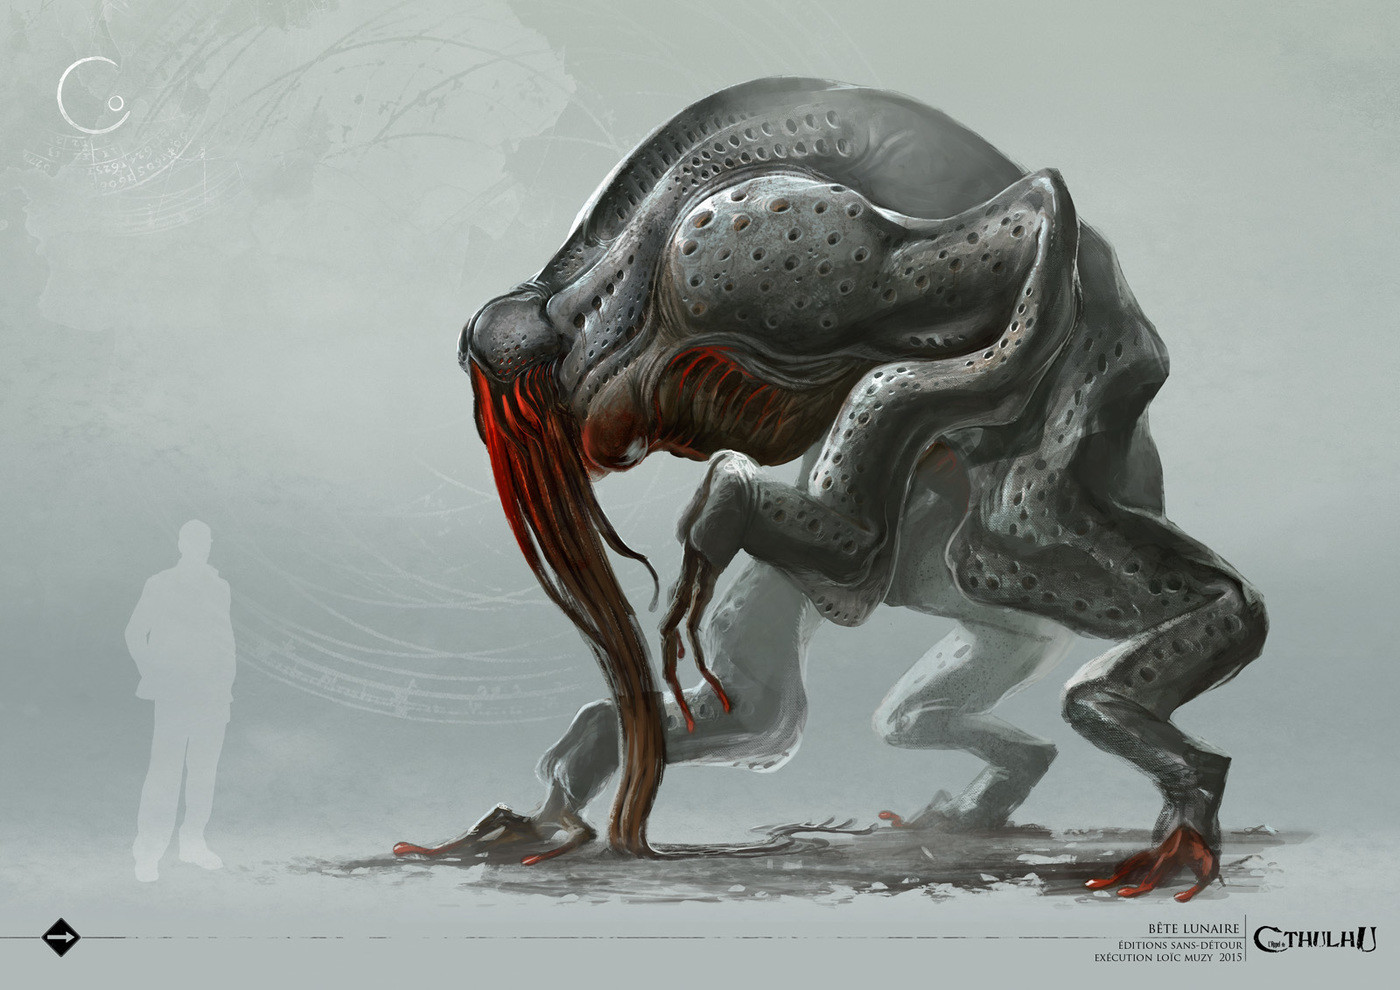 Cthulhu Monstrosities COMPILATION Lovecraft Mythos Monsters.